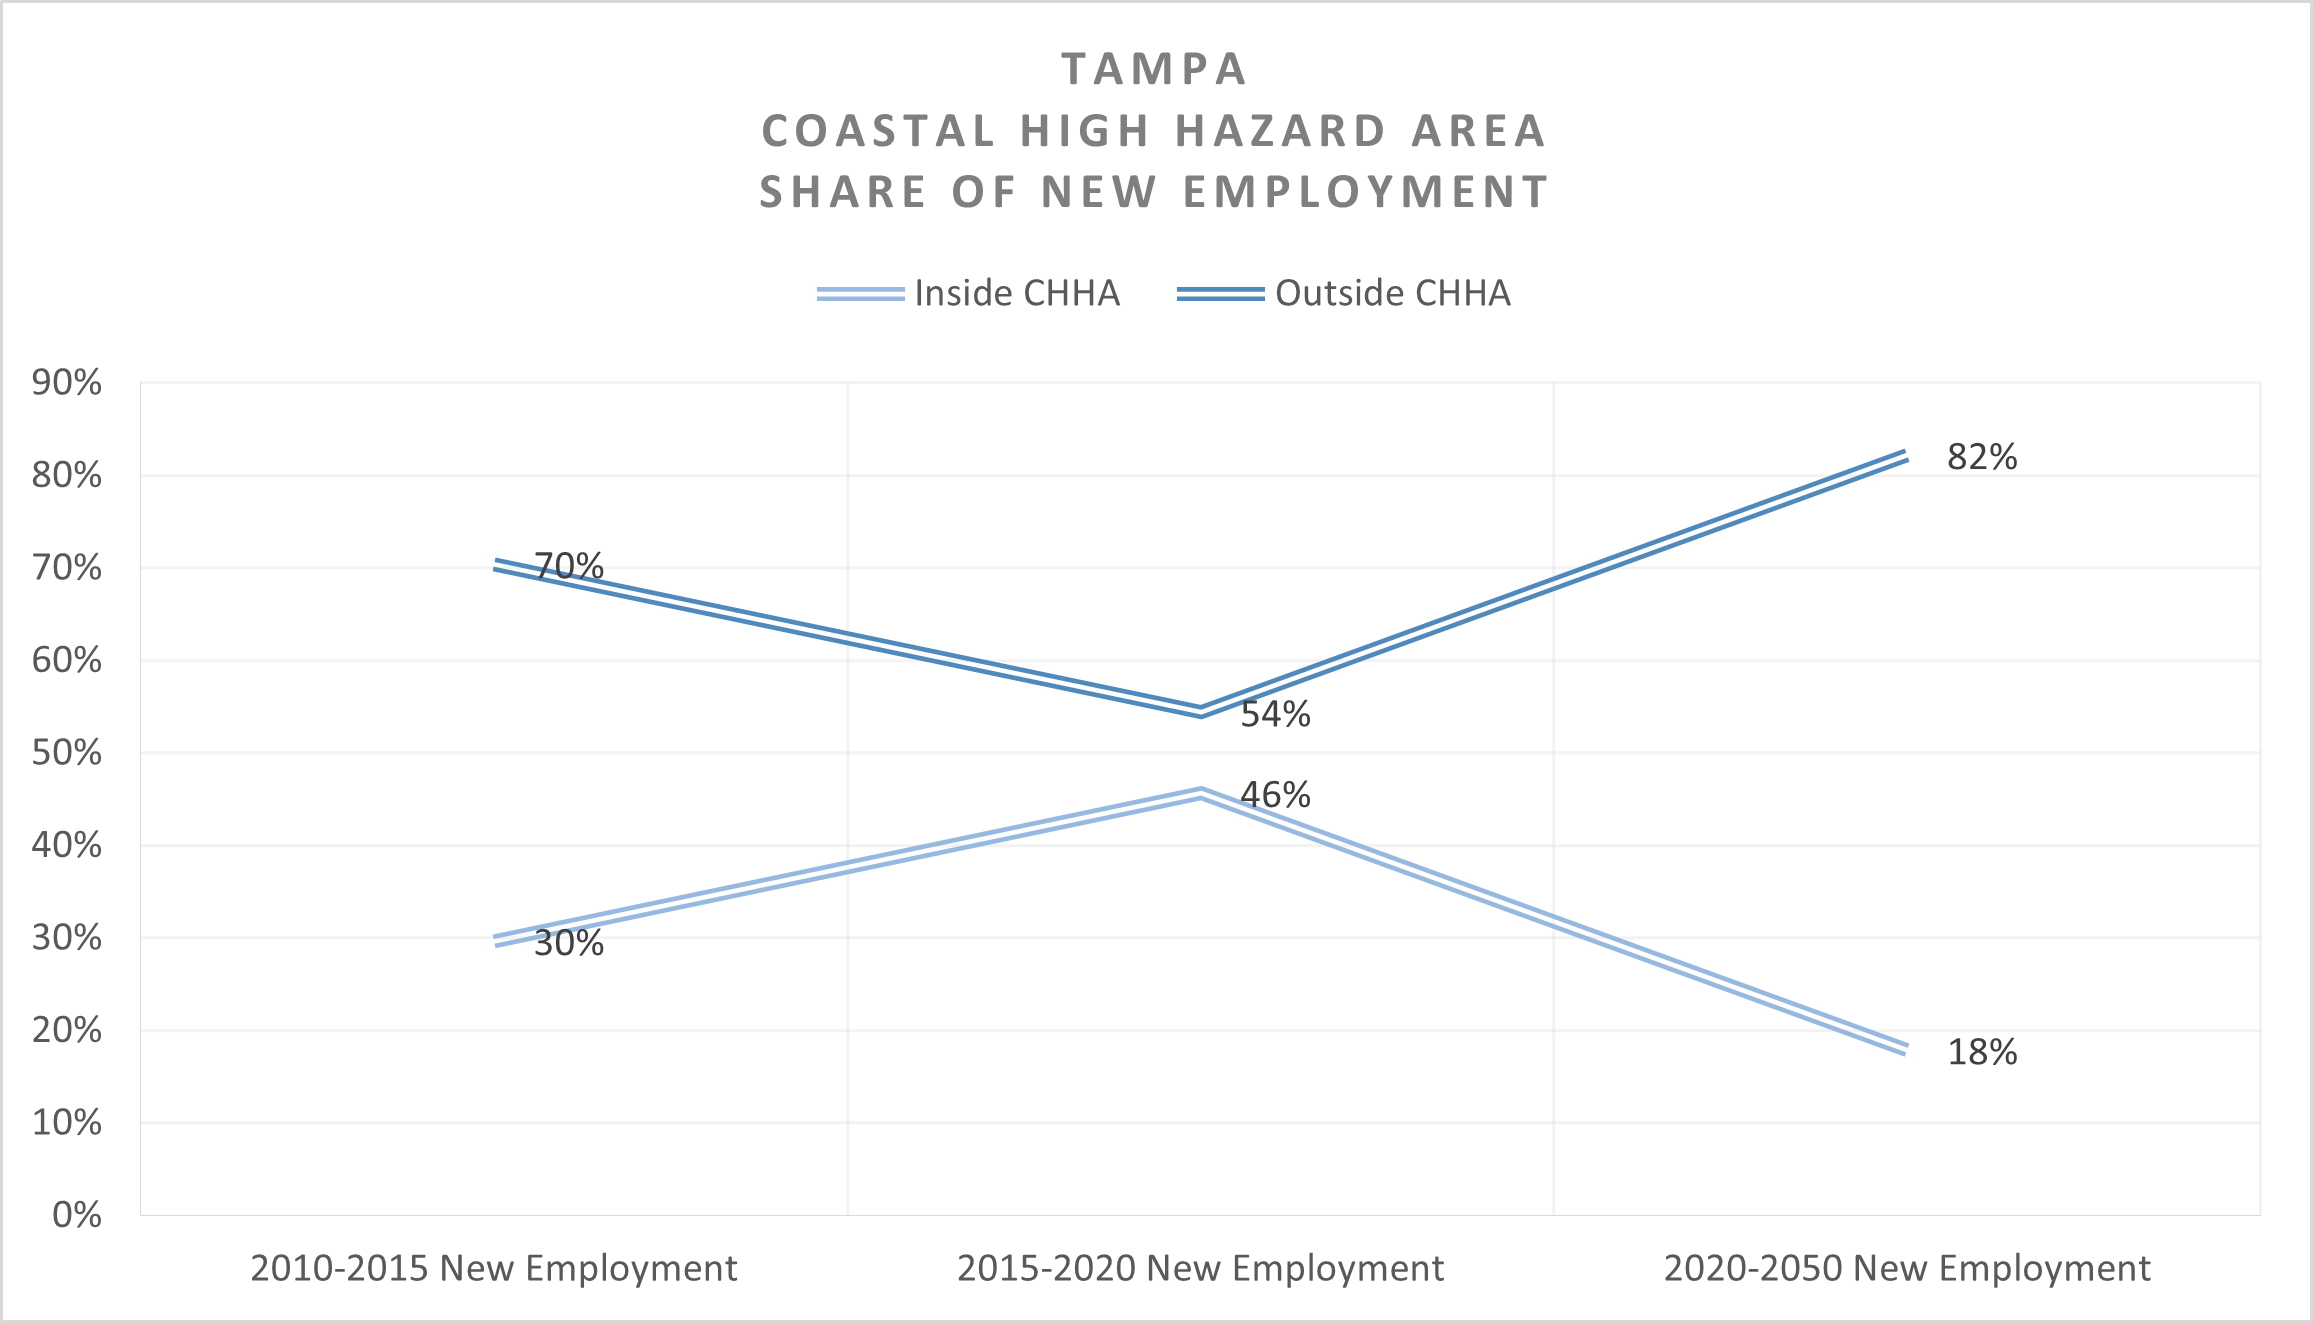 This chart shows Tampa's share of new jobs inside and outside the CHHA. Currently, 46% of the new jobs moved inside the CHHA and 54% of the jobs are outside CHHA. By 2050, the share of jobs inside the CHHA is expected to decrease significantly. Namely, 18% of the jobs will be inside the CHHA and 82% of the jobs will be outside CHHA.